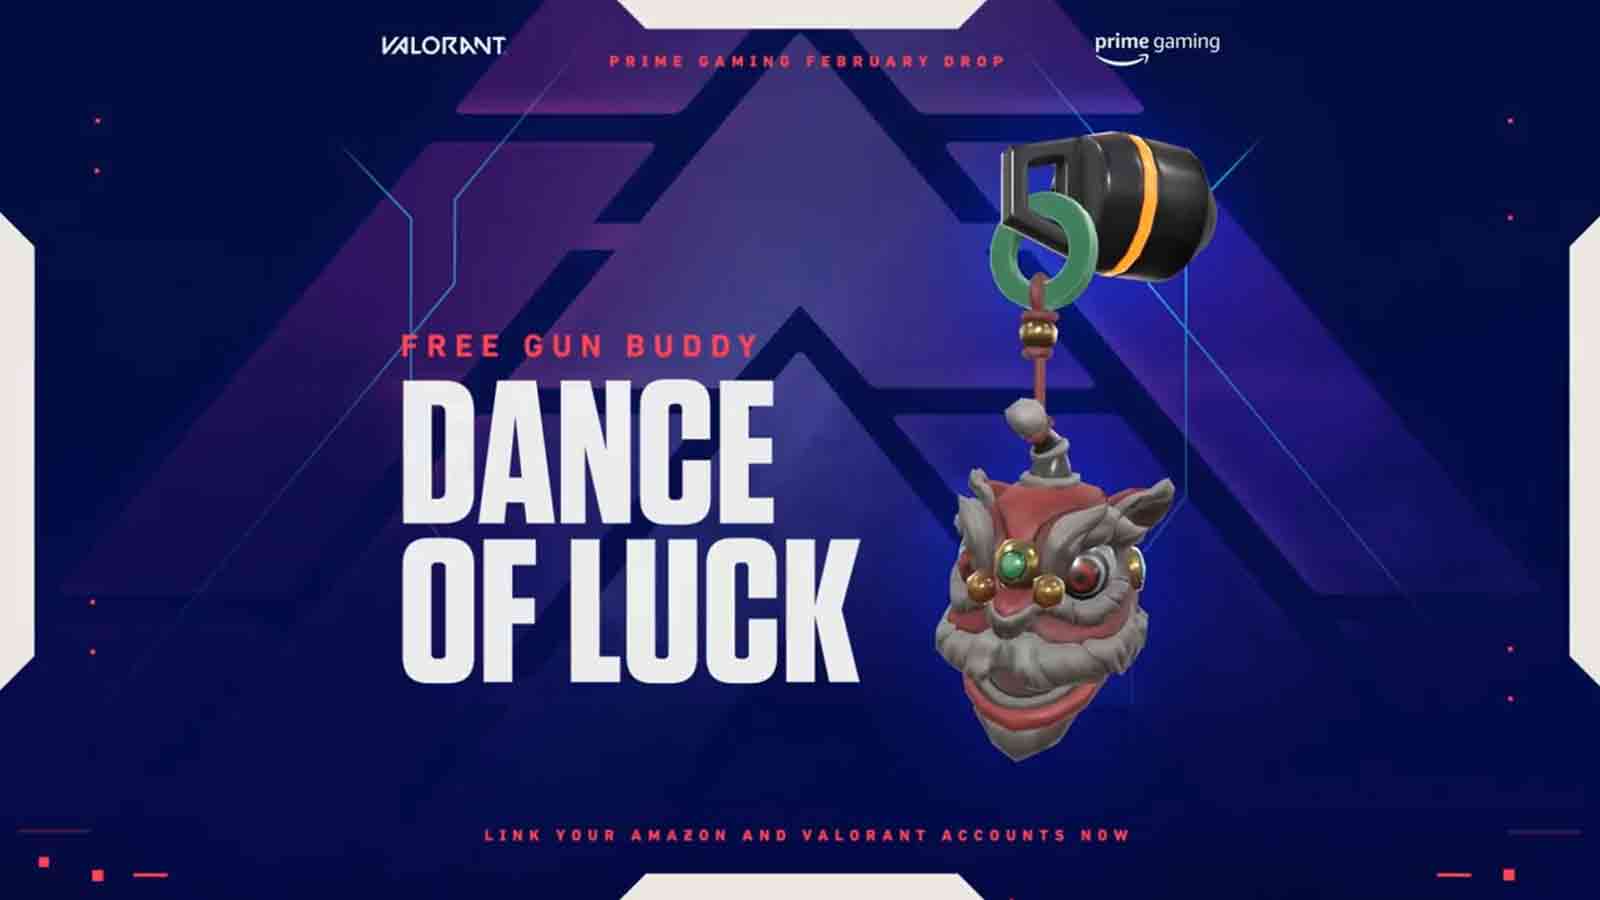 How to unlock Valorant's Dance of Luck gun buddy for free